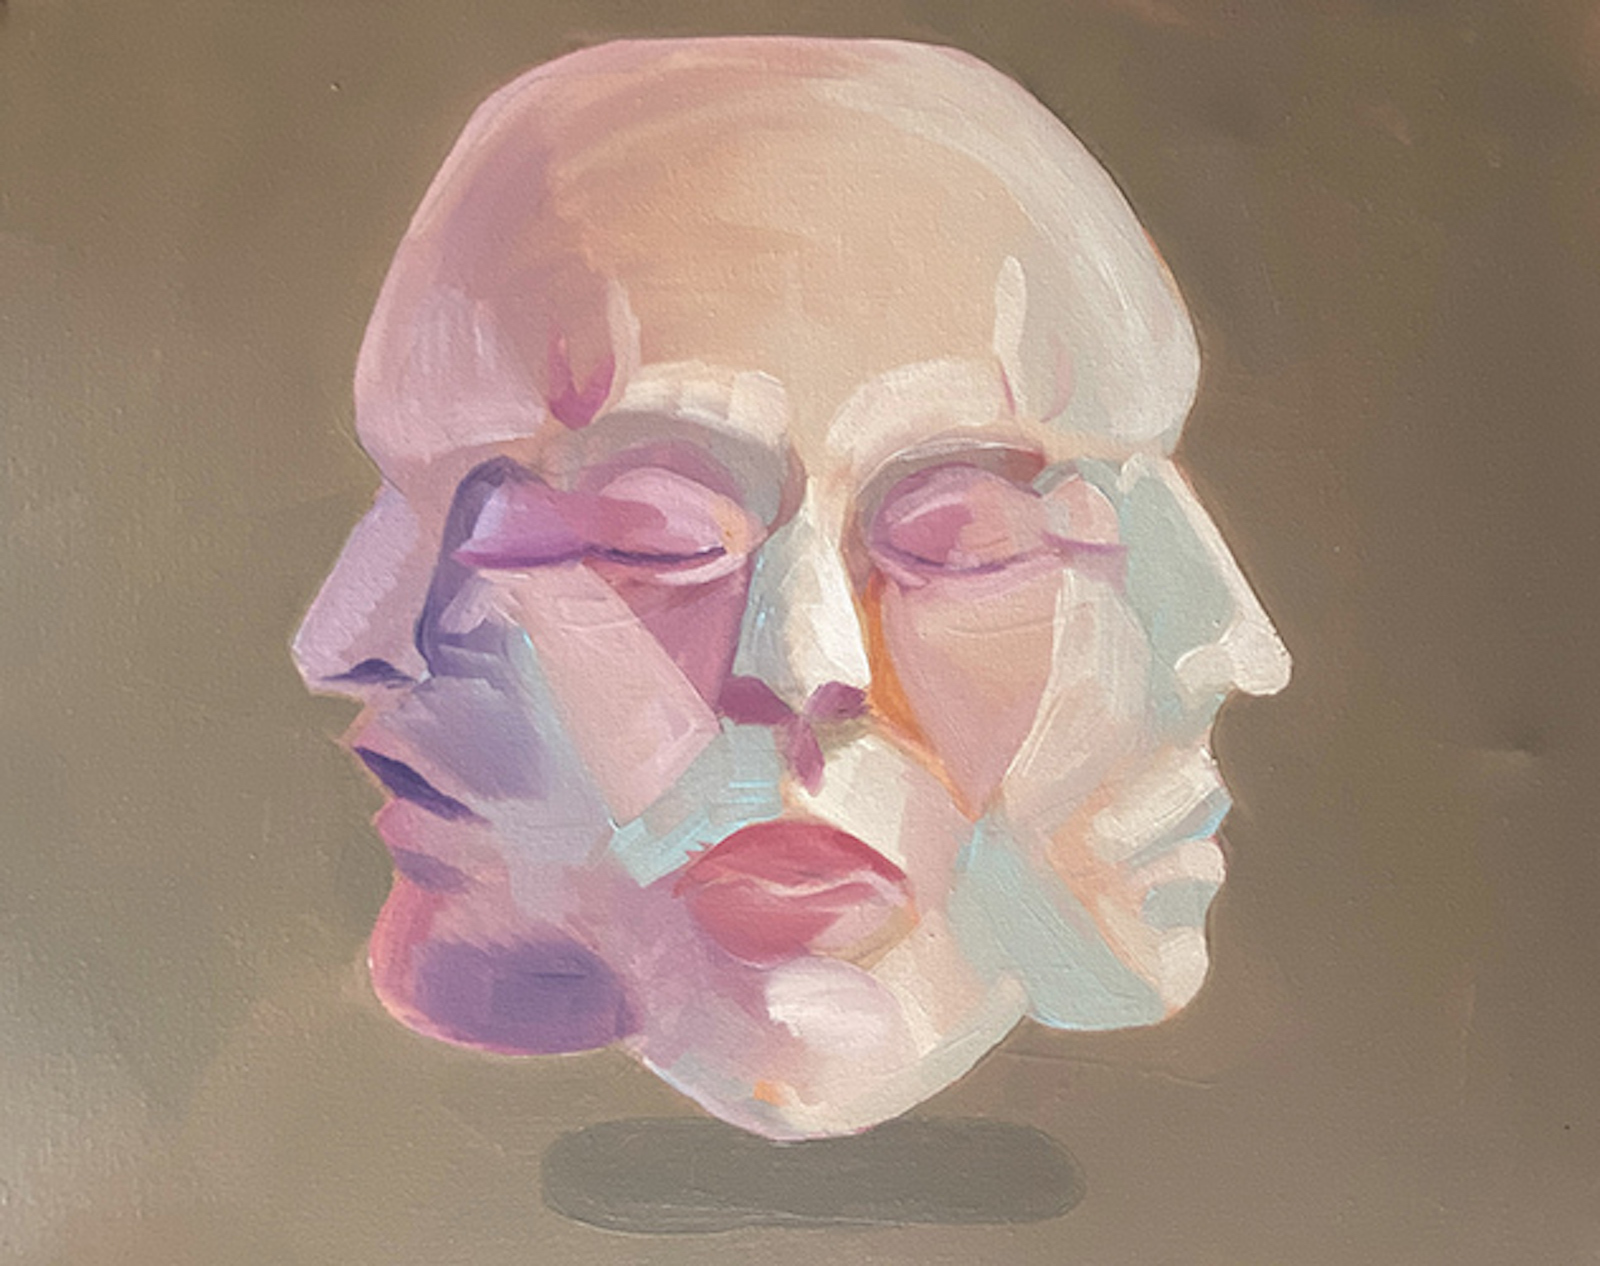 A painting of a head with three faces